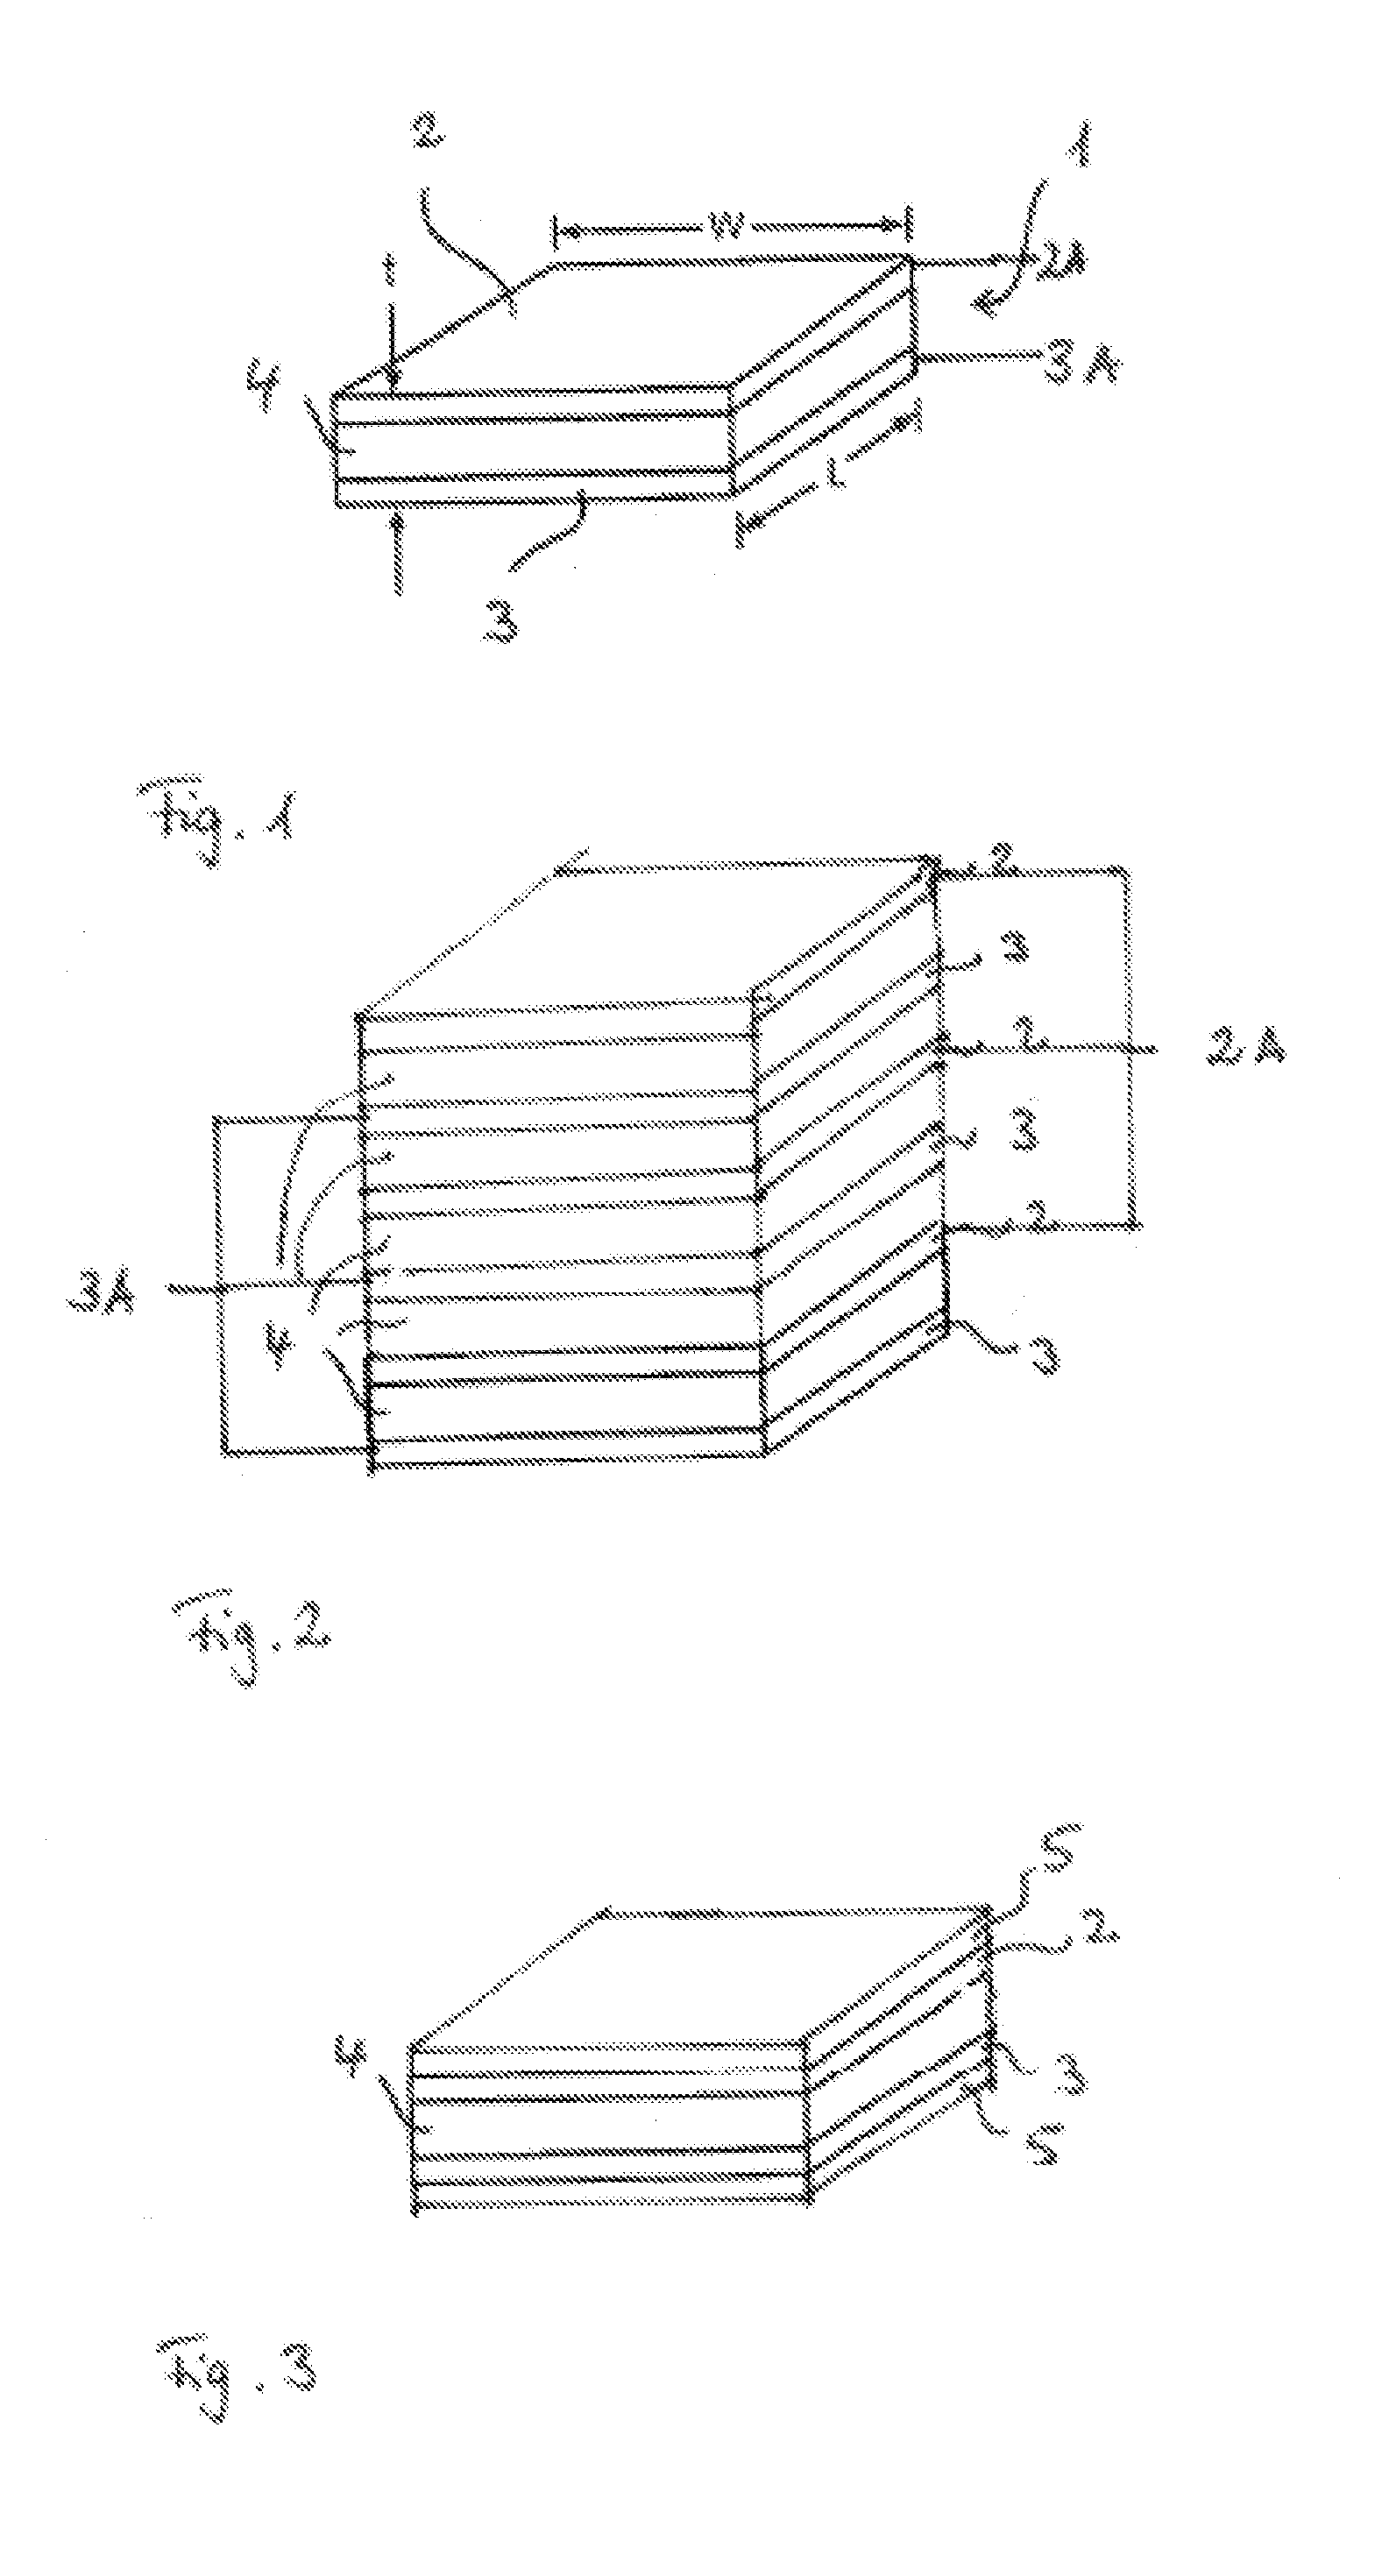 Fluorosilicone-Based Dielectric Elastomer and Method for its Production